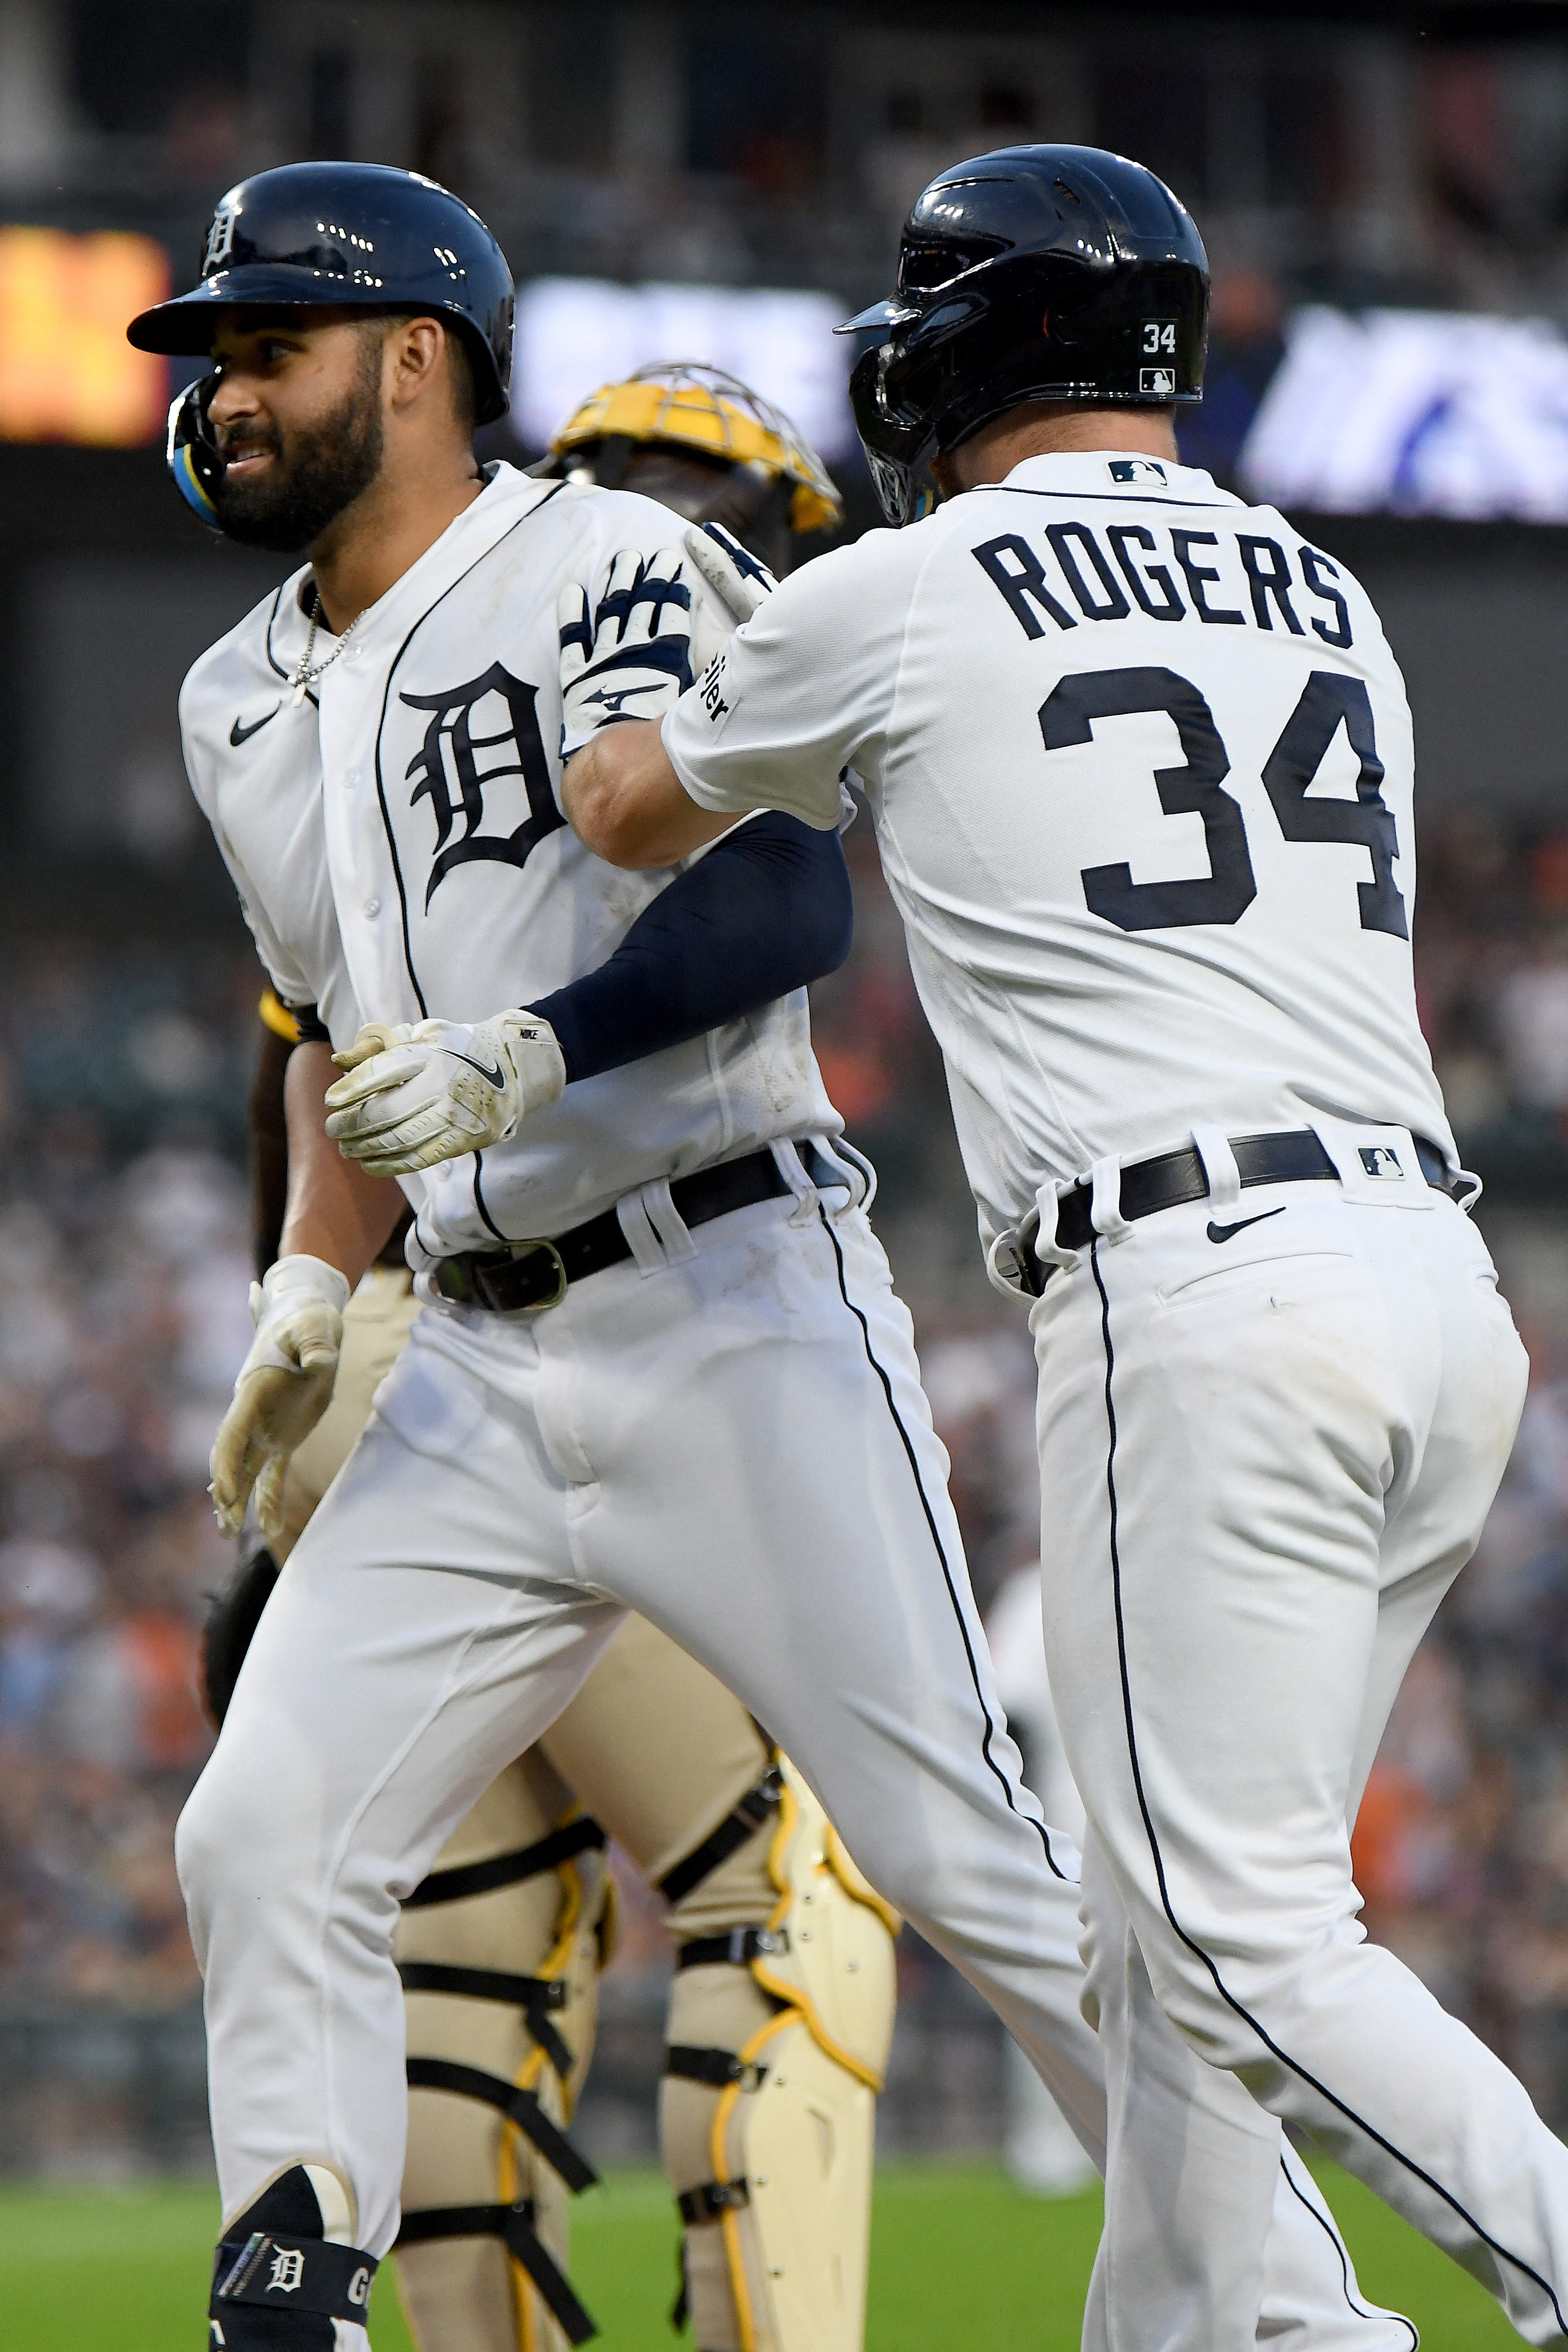 Tigers Soto gives up home run, but American League holds on for win in MLB All  Star Game, 1450 AM 99.7 FM WHTC